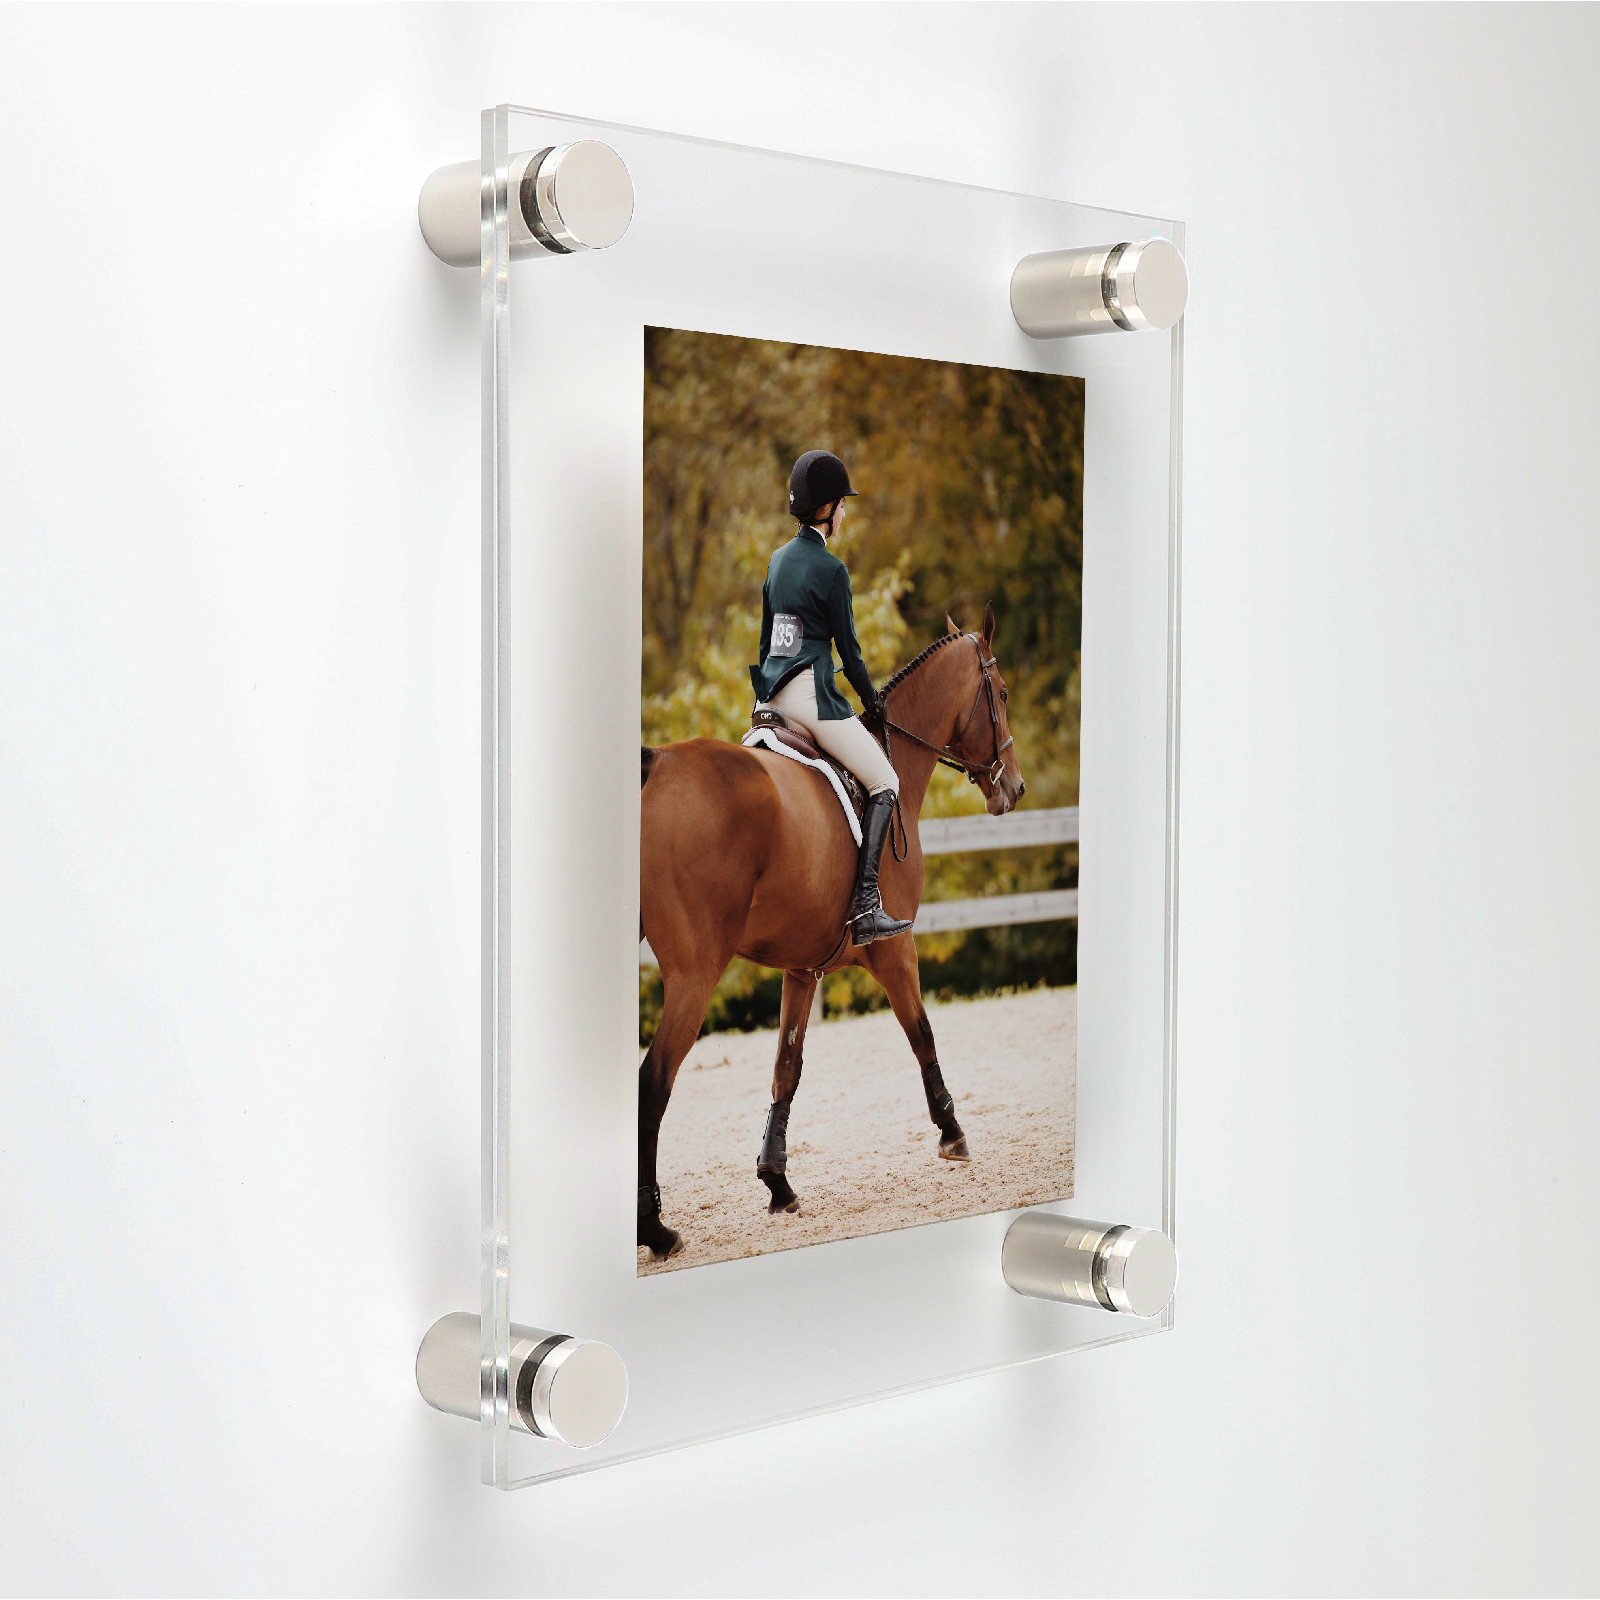 (2) 11'' x 13-1/2'' Clear Acrylics , Pre-Drilled With Polished Edges (Thick 1/8'' each), Wall Frame with (4) 3/4'' x 1'' Polished Stainless Steel Standoffs includes Screws and Anchors